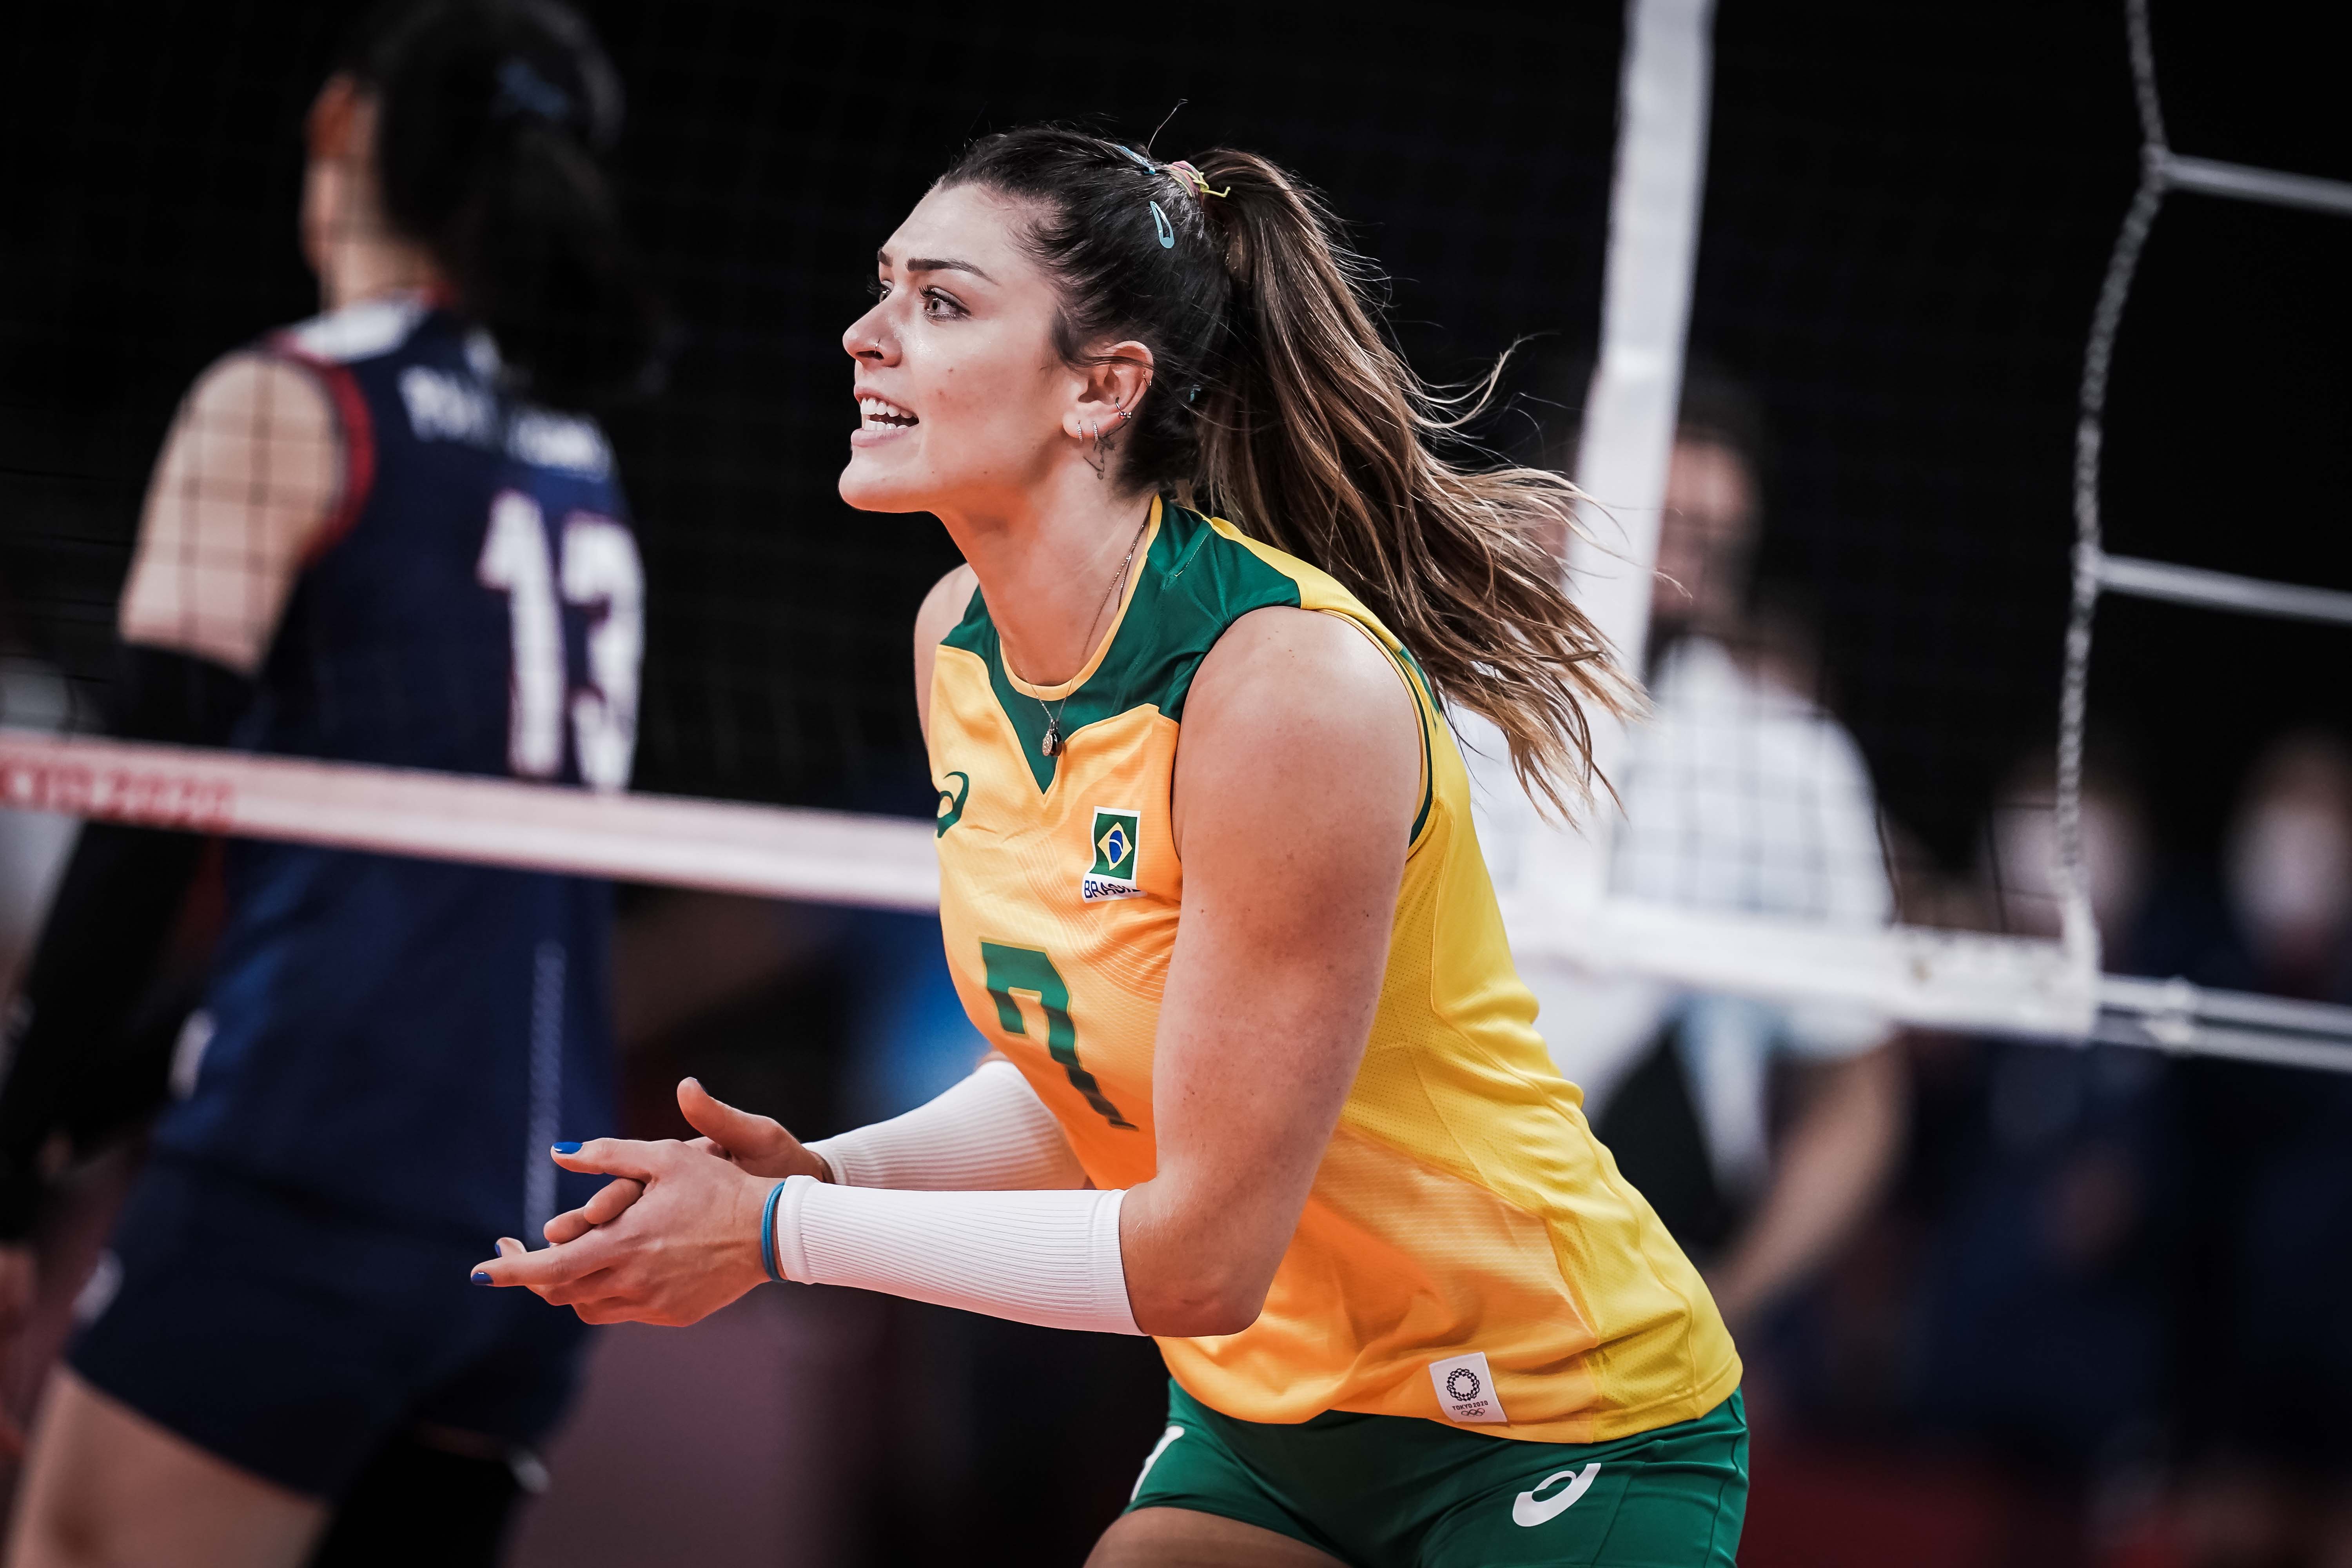 Rosamaria on taking risks and the Brazilian huddle | volleyballworld.com